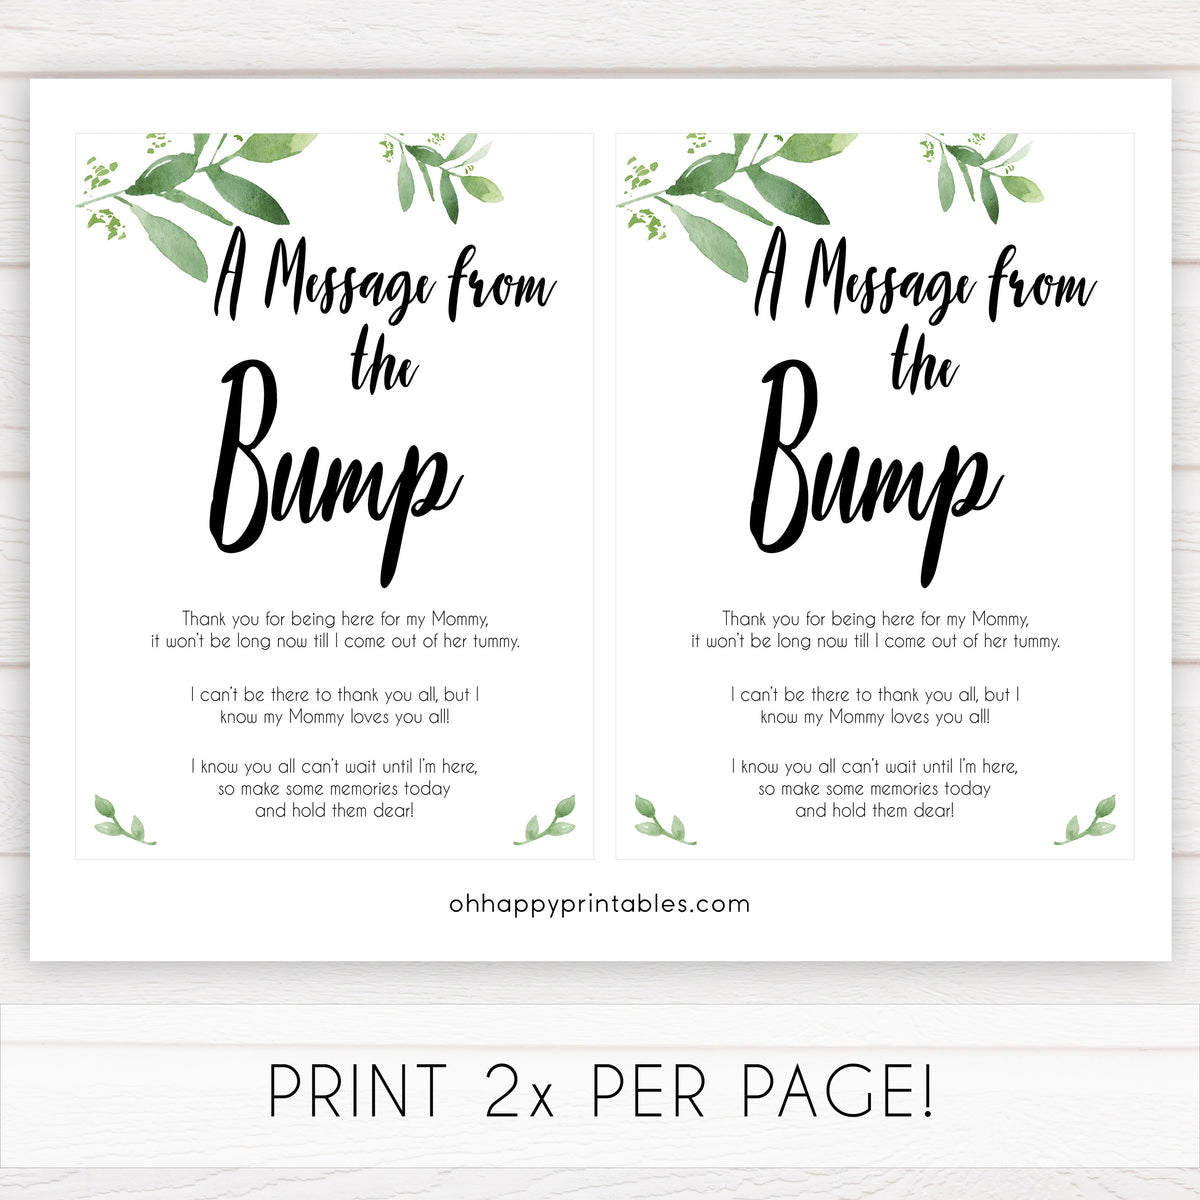 a-message-from-the-bump-botanical-printable-baby-shower-games-ohhappyprintables